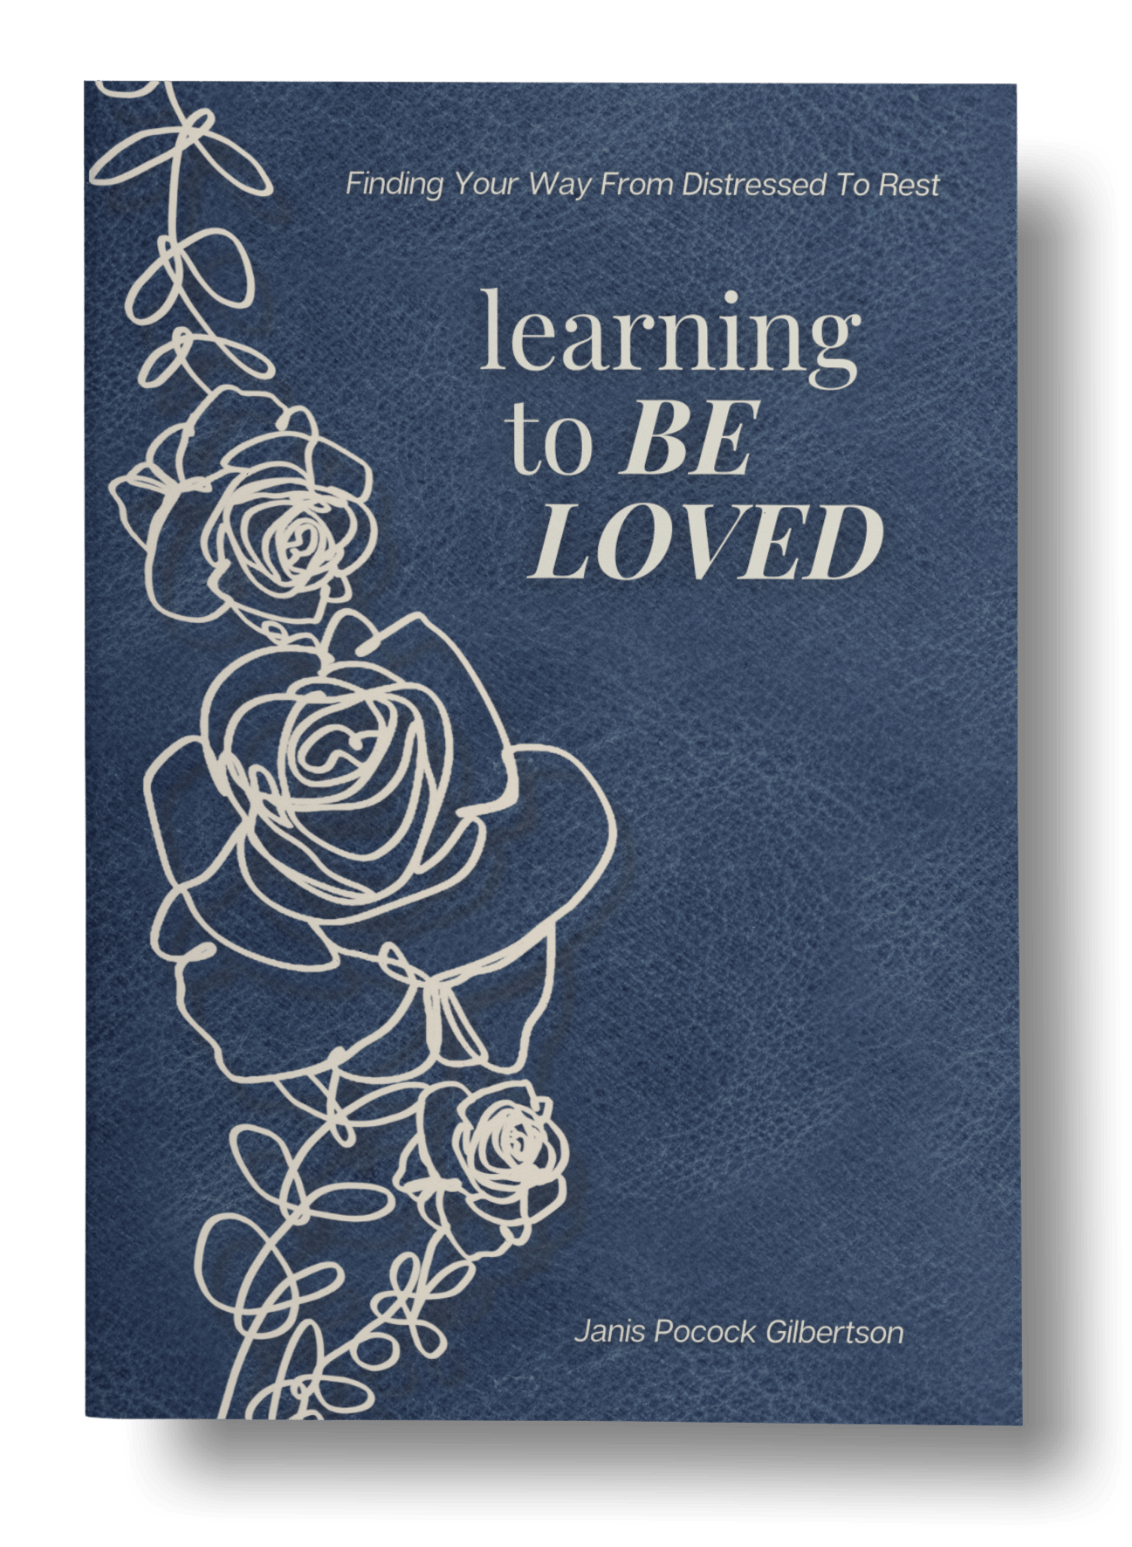 Cover Image - Learning To BE LOVED